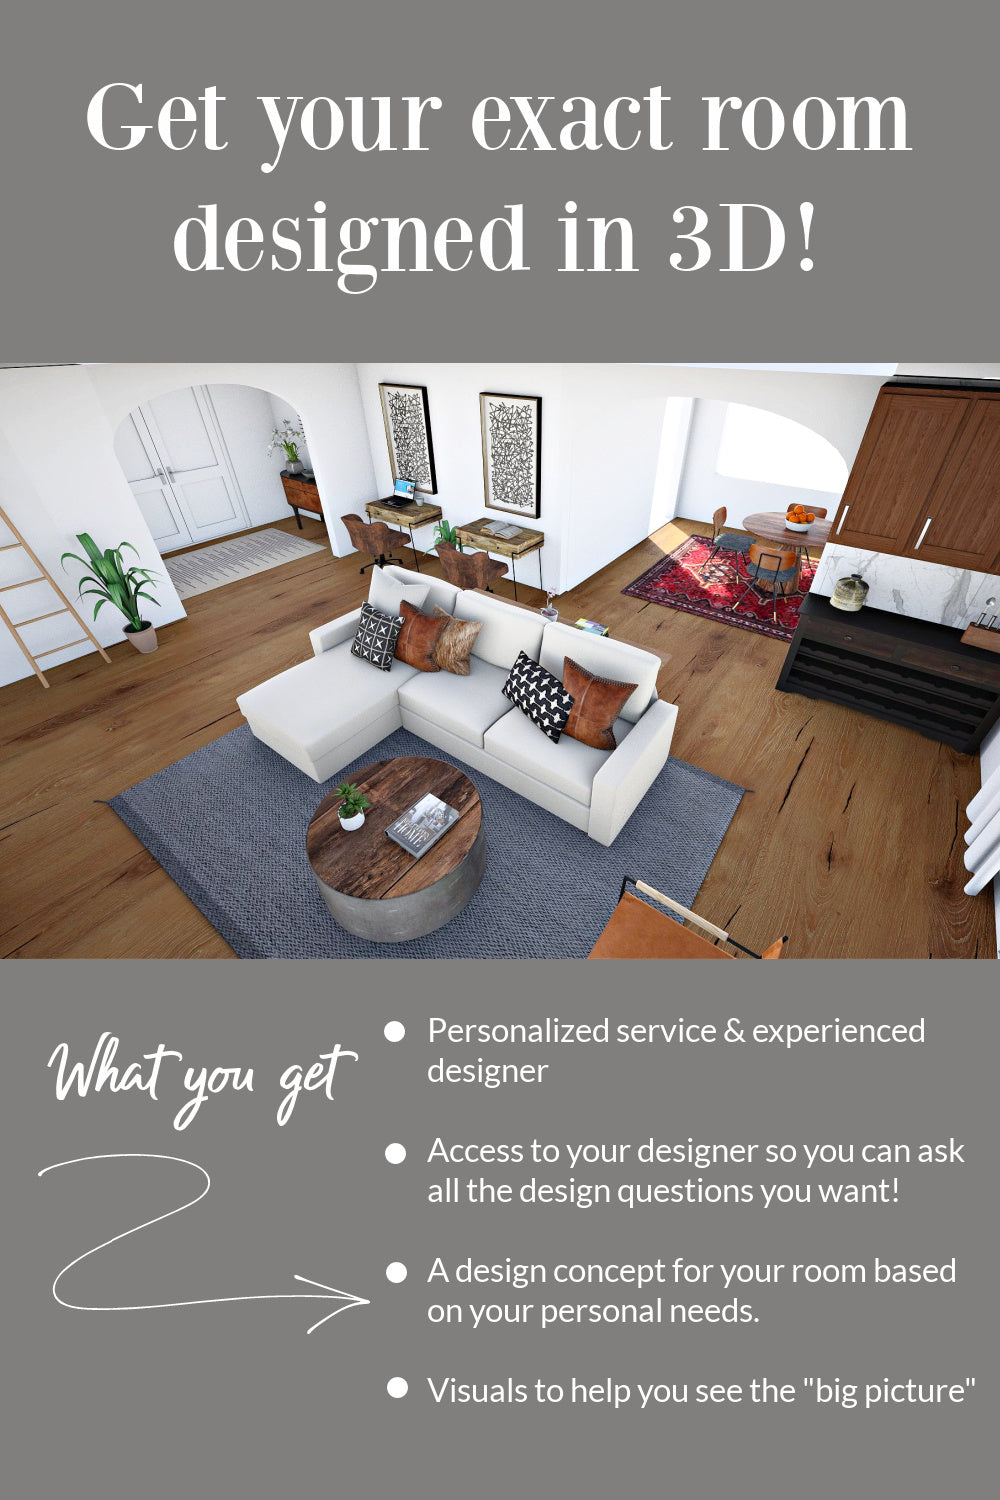 Get Your Exact Room Designed In 3D With Our Virtual Home Design Service